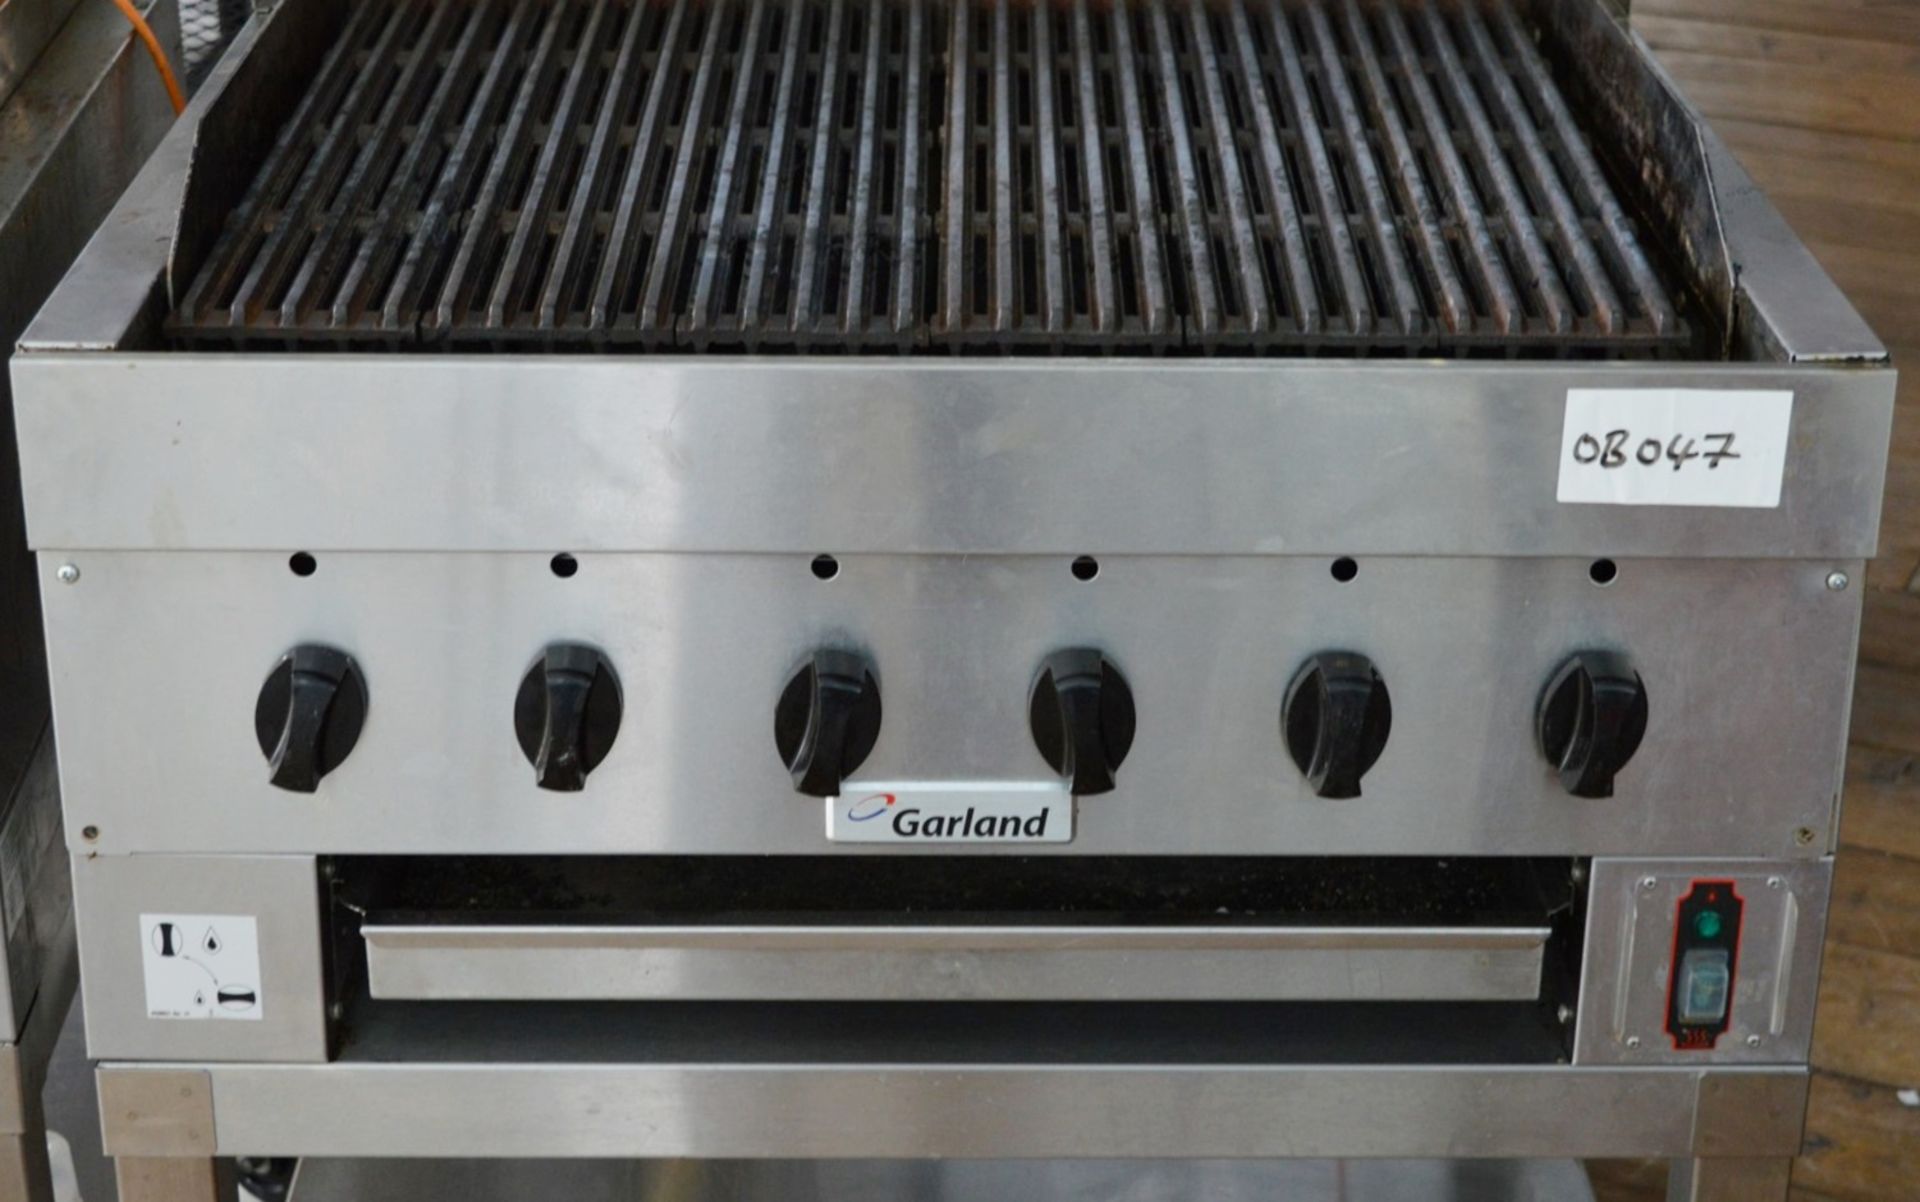 1 x Garland Griddle With Stand - H91 x W85 x D75cms - Stainless Steel - CL245 - Dual Fuel Gas and - Image 3 of 5